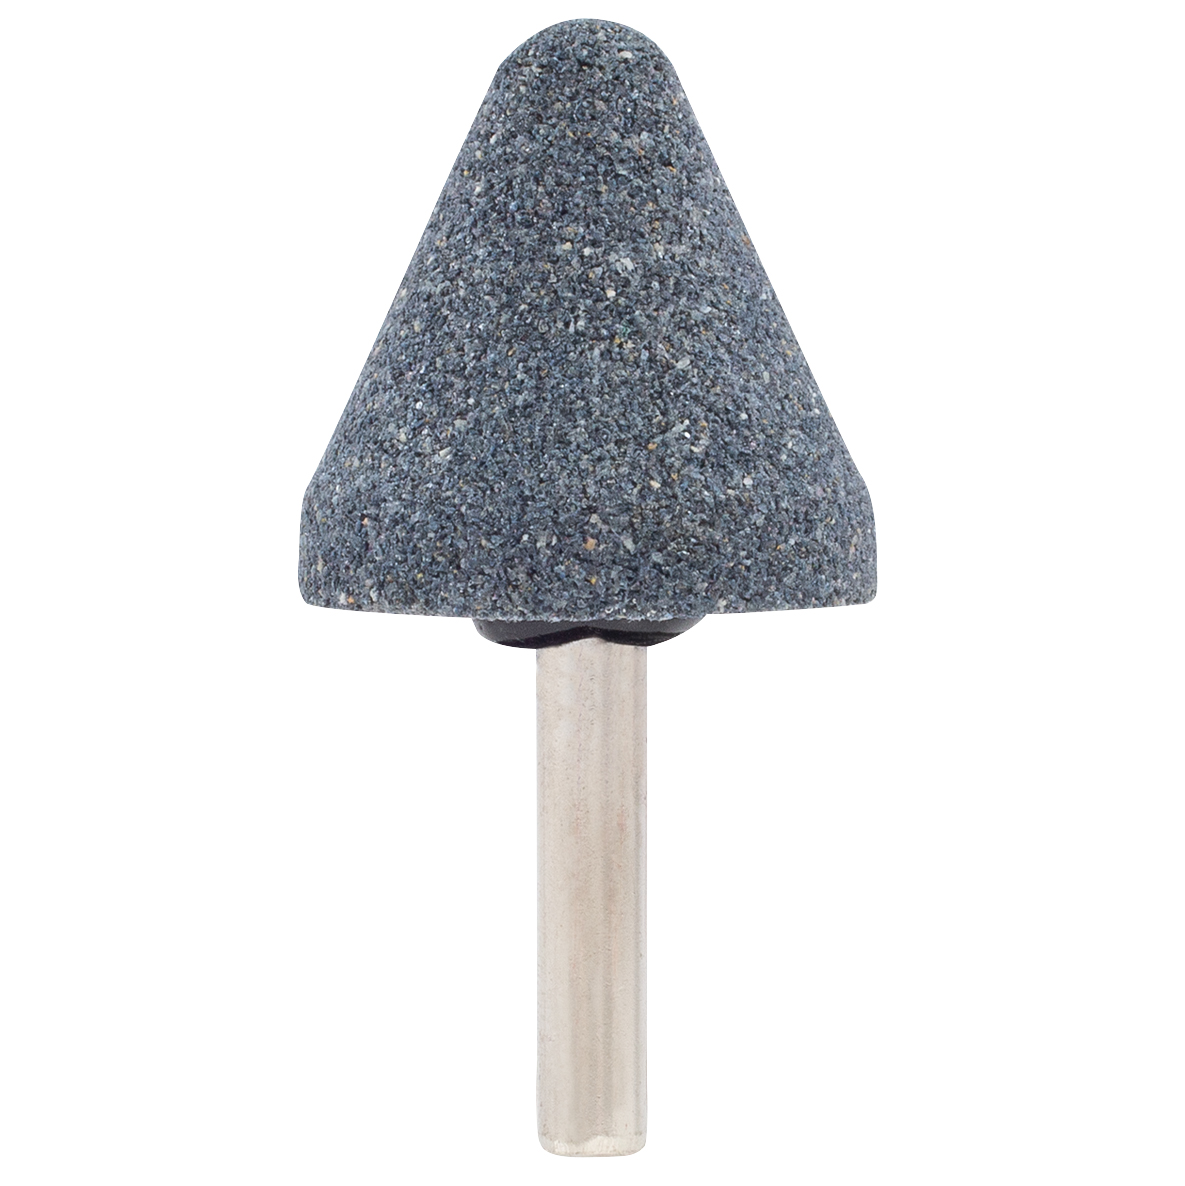 Dremel 1/4 in. Rotary Tool Aluminum Oxide Pointed Cone Shaped